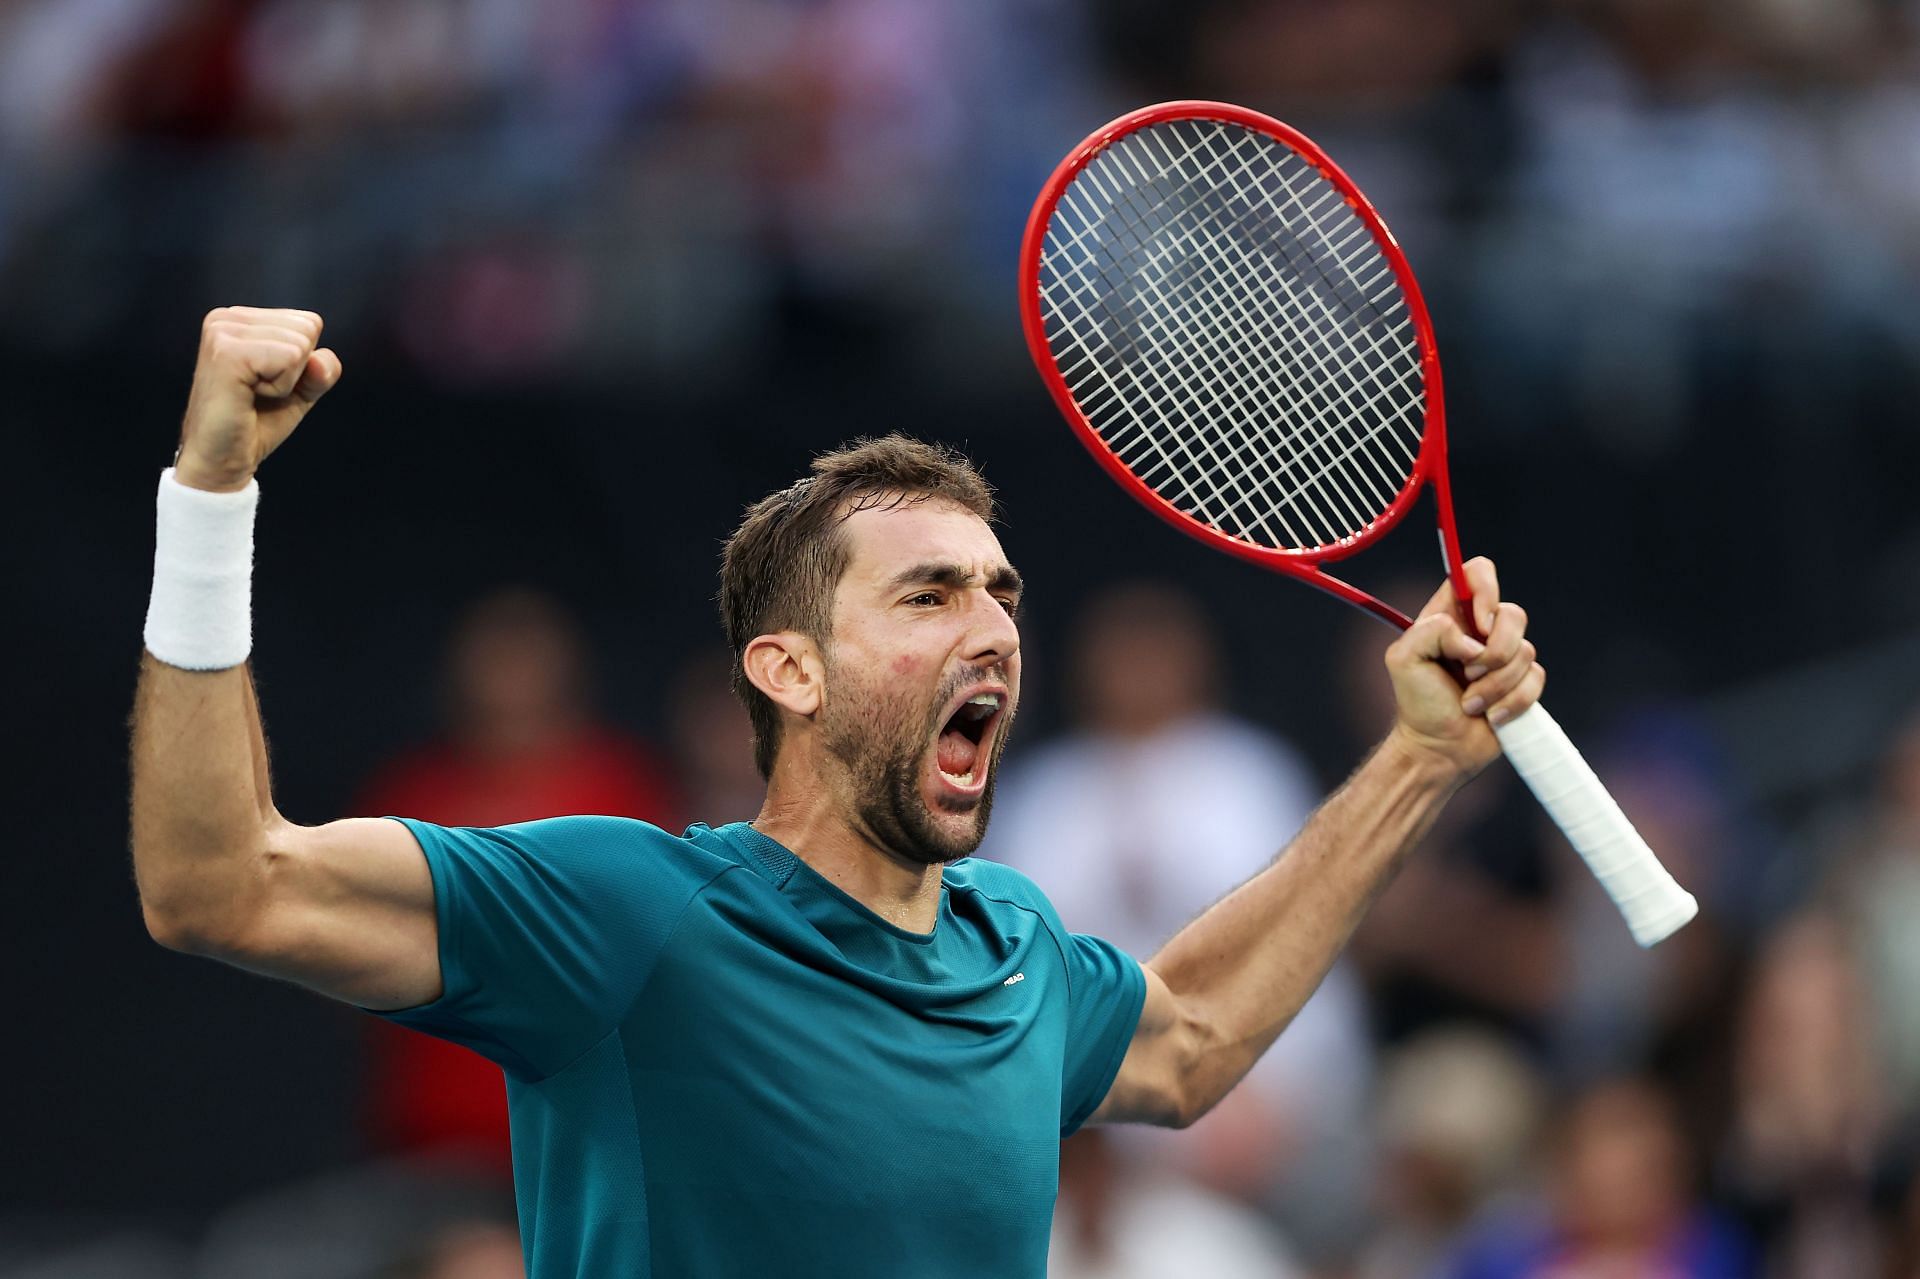 Cilic will be eyeing a third semifinal appearance this year.